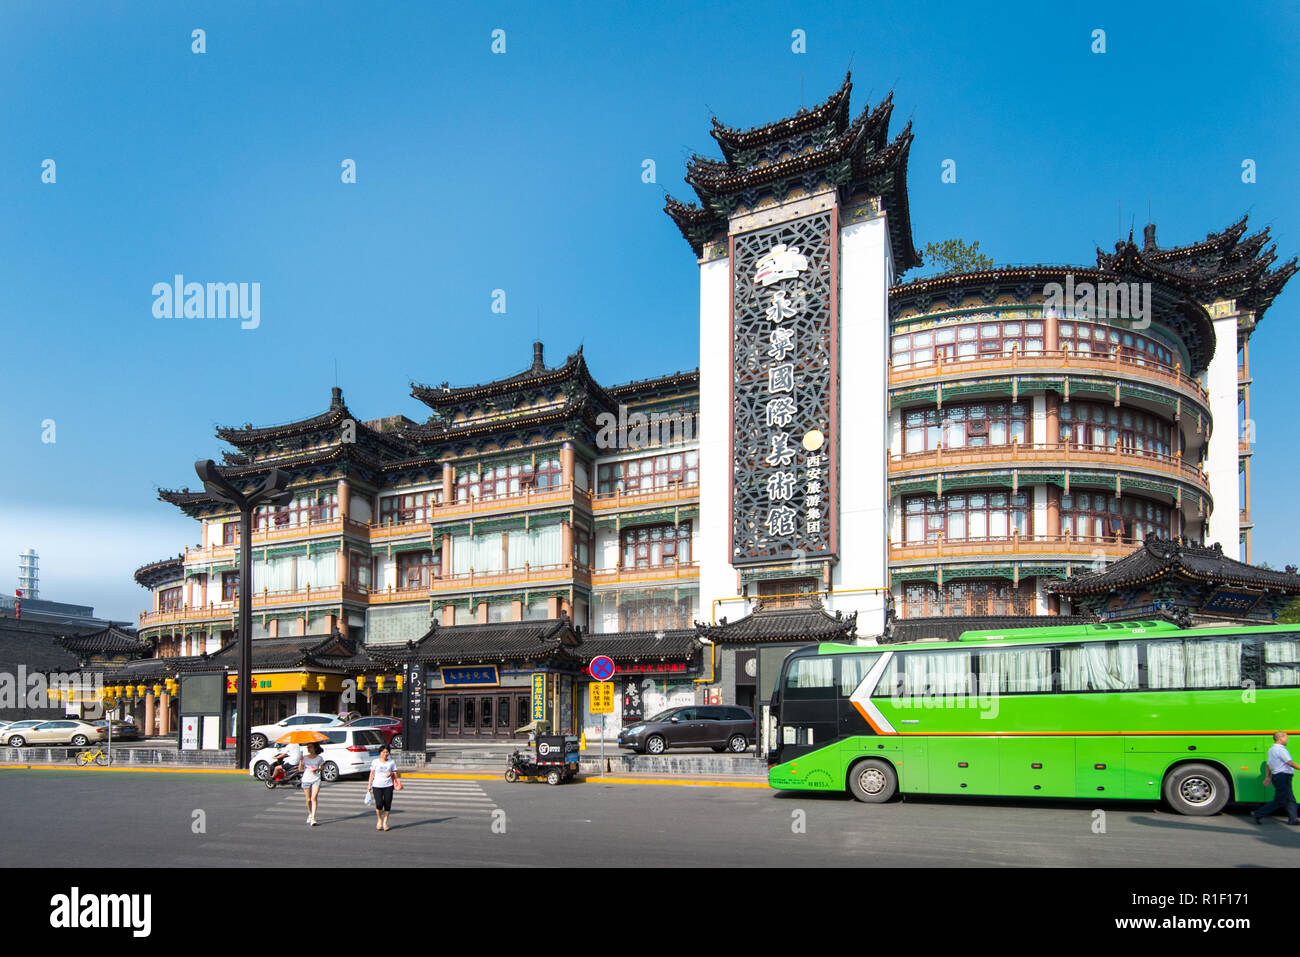 XIAN, CHINA - 26JUL2018: Yongning International Art Museum which is located near the South Gate. Stock Photo